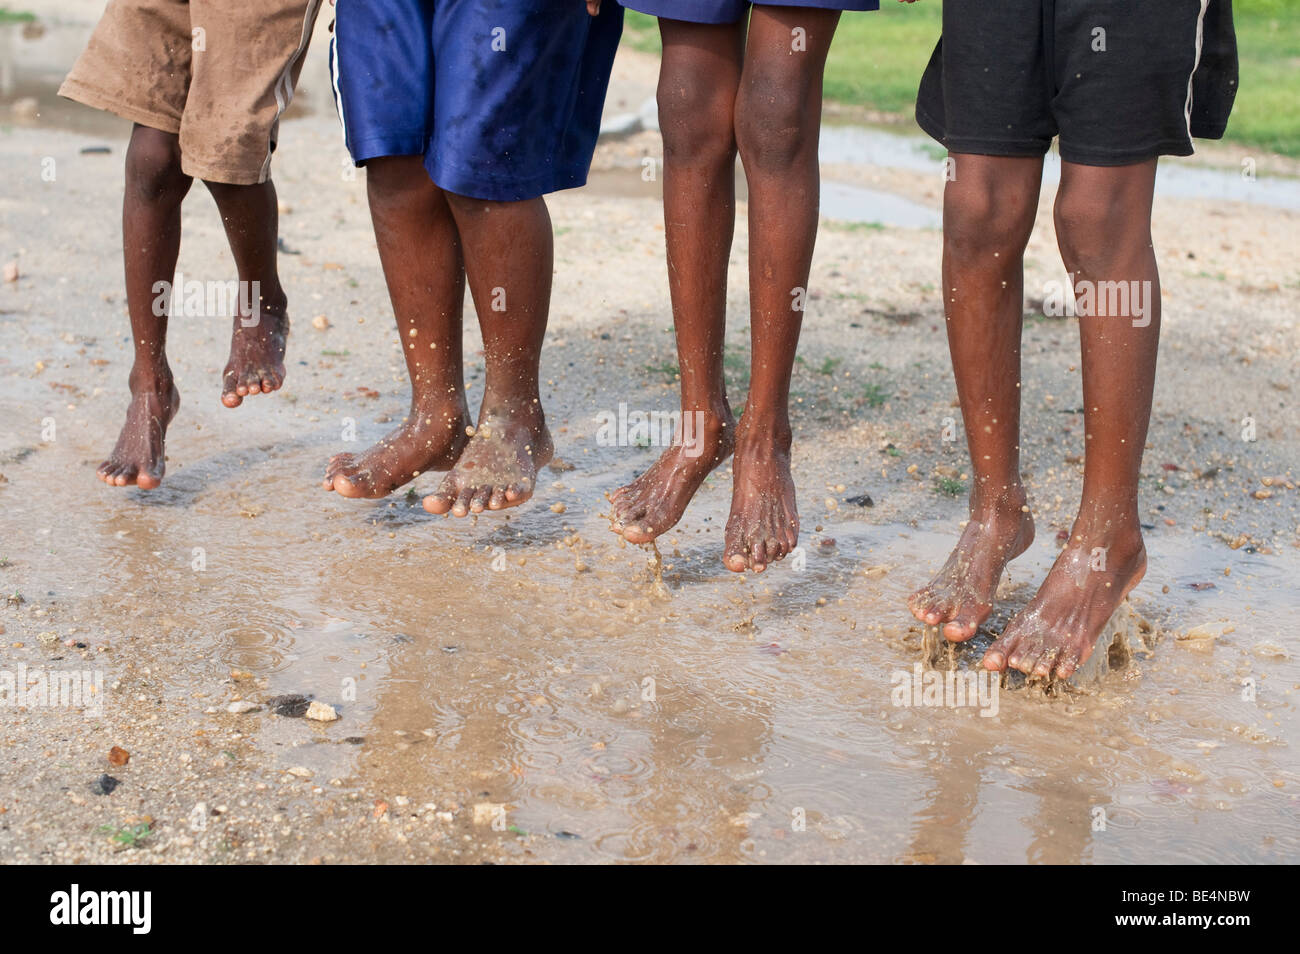 Indian children jumping and splashing in a puddle of water. Andhra Pradesh, India Stock Photo